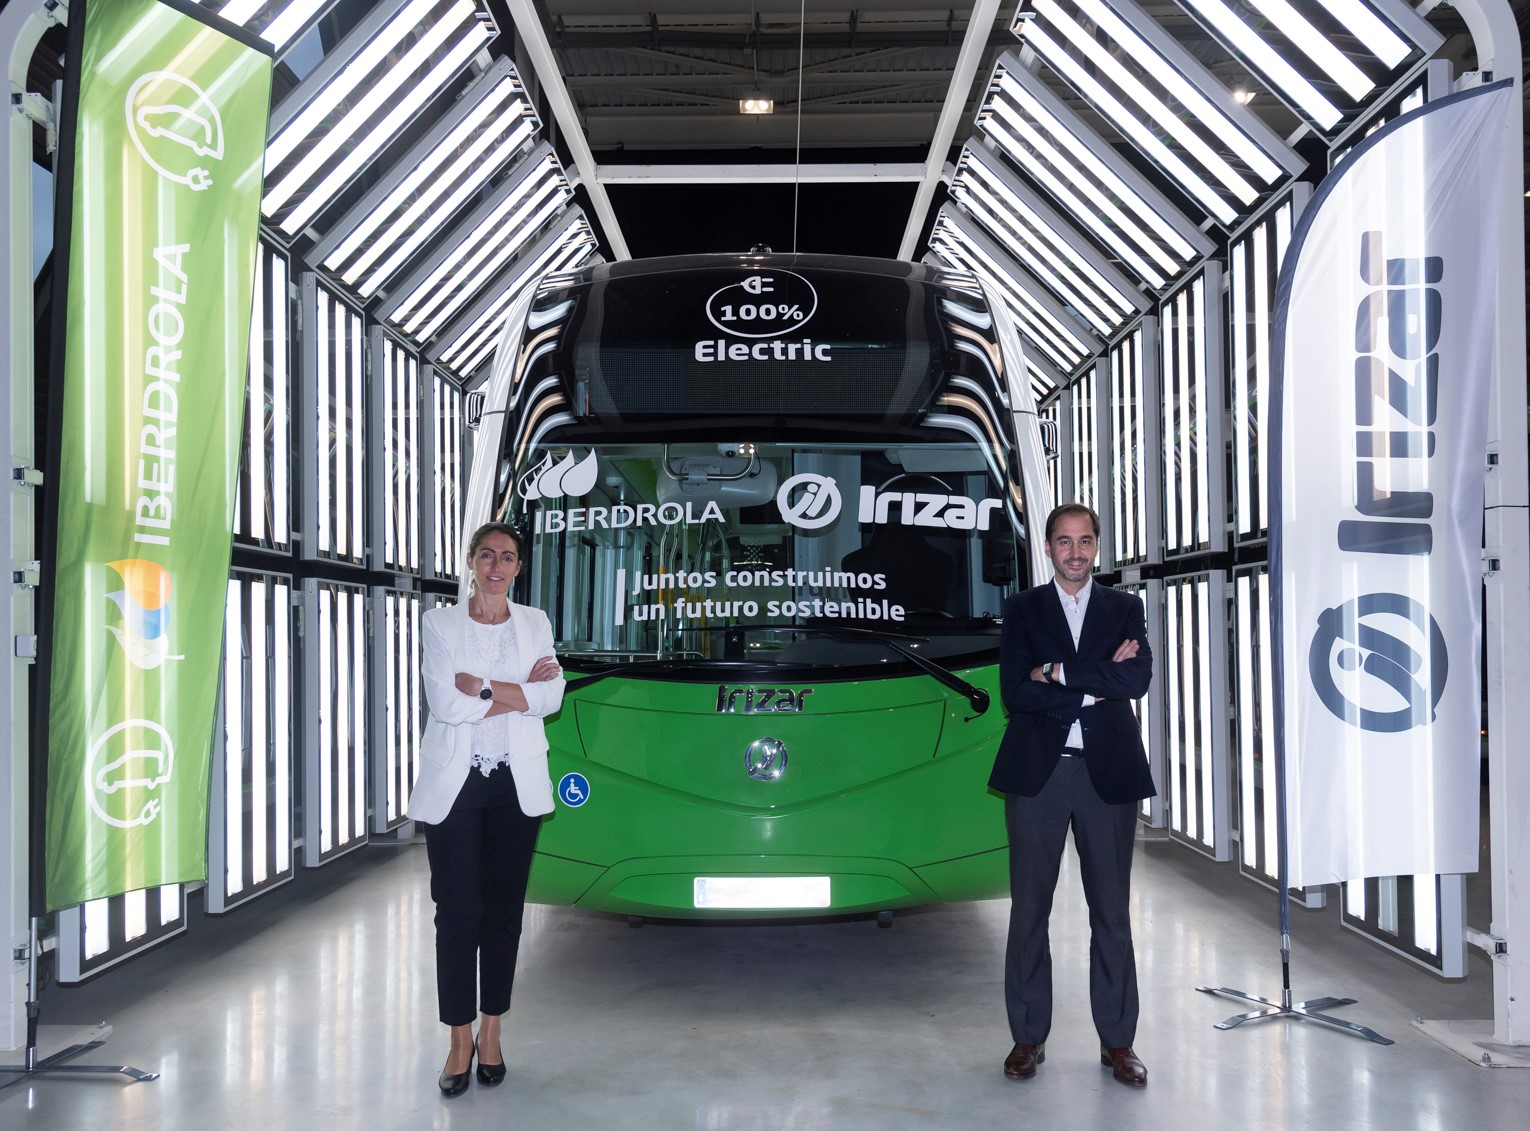 Irizar e Iberdrola speed up electrical mobility: Agreement to electrify urban transport and supply green energy